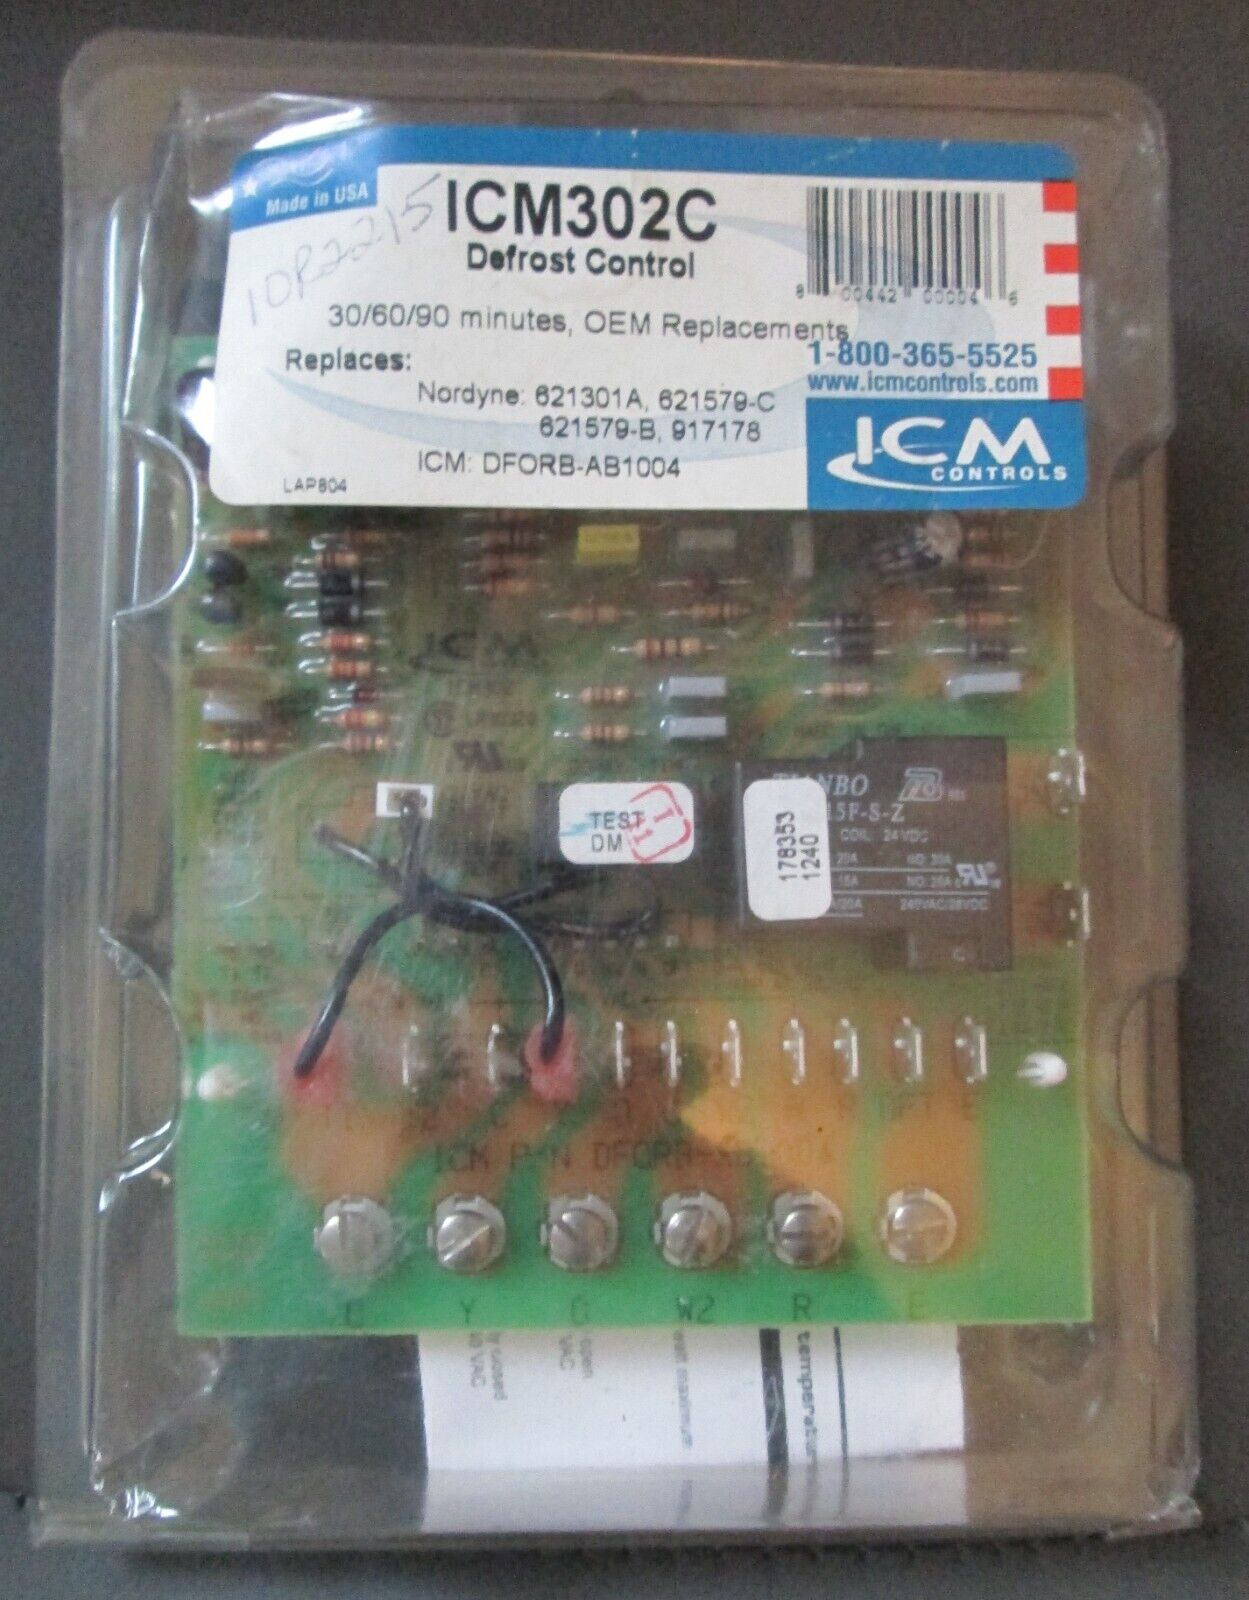 Defrost Control ICM302C  30/60/90 OEM Replacements New